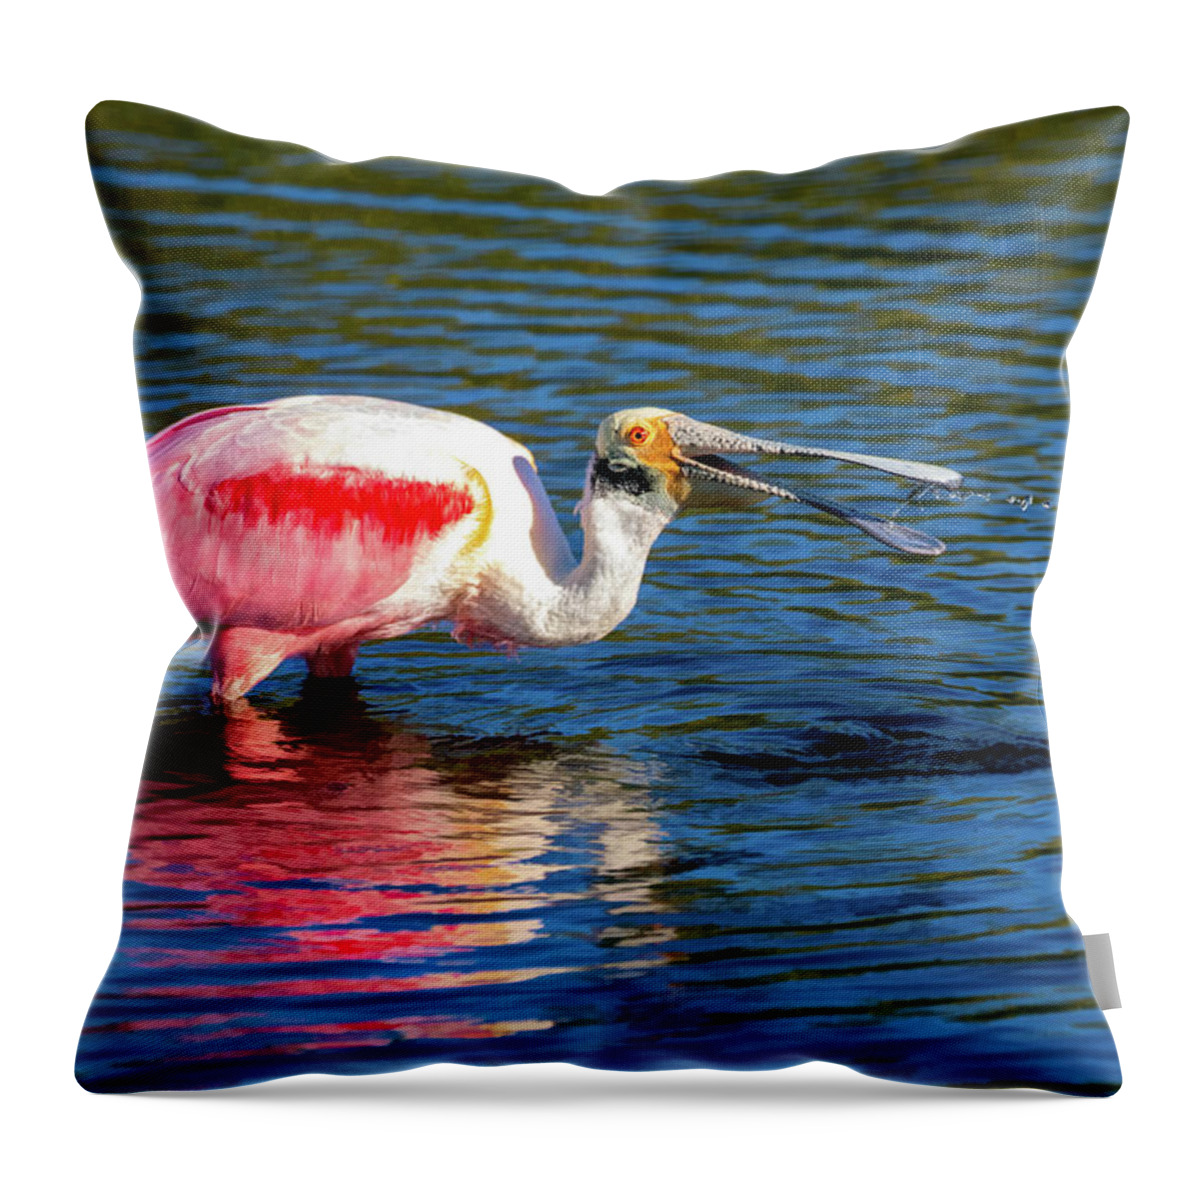 Roseate Spoonbill Throw Pillow featuring the photograph Roseate Spoonbill Fishing by Jaki Miller